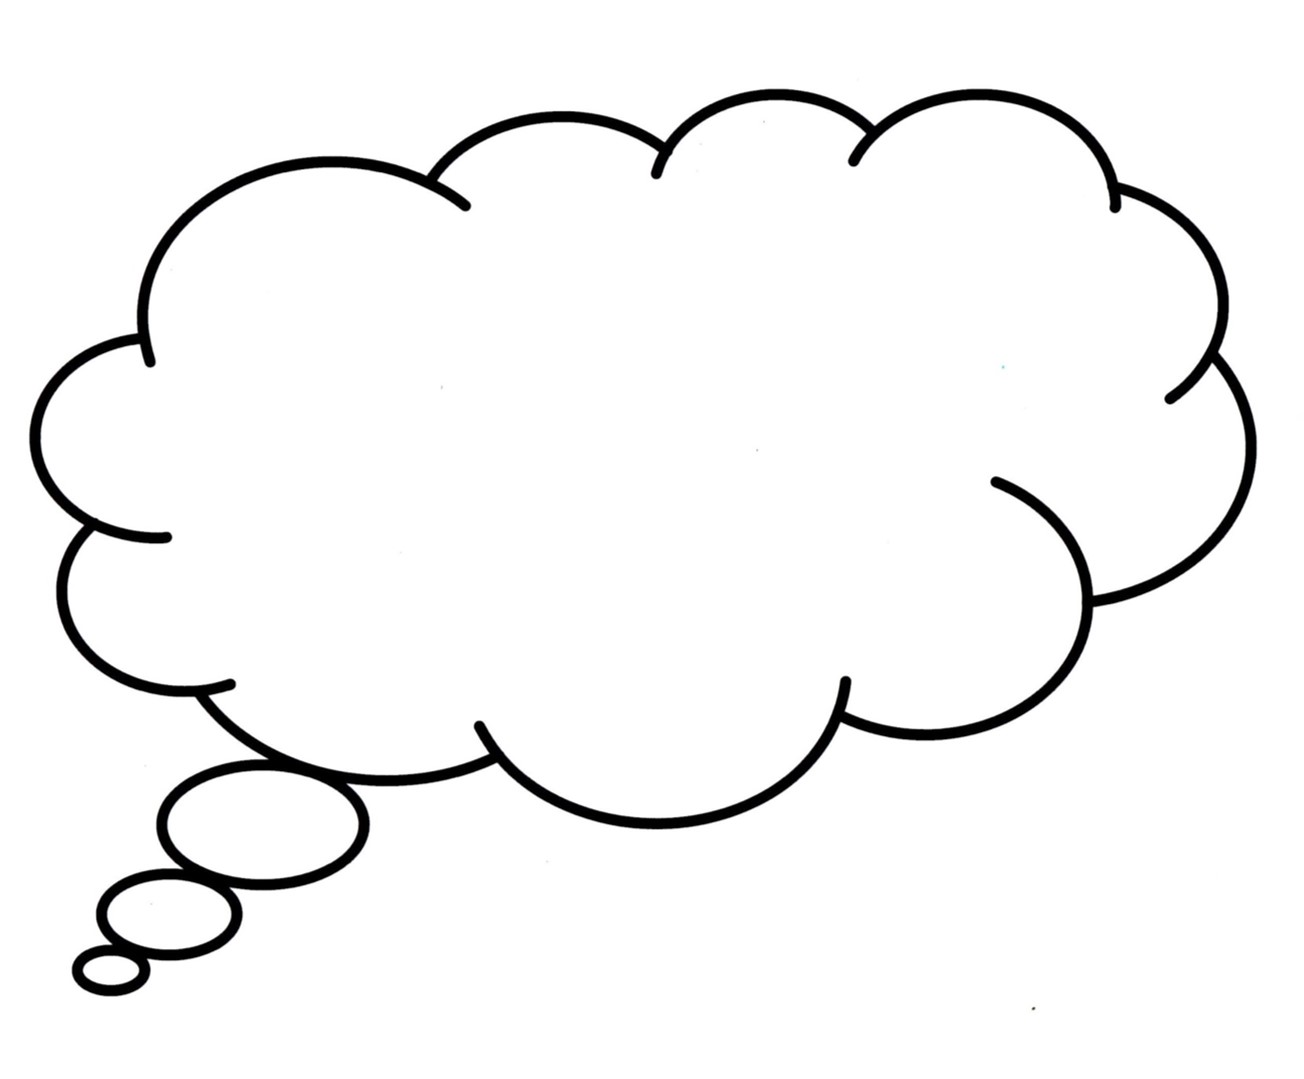 Free Thought Bubble, Download Free Clip Art, Free Clip Art